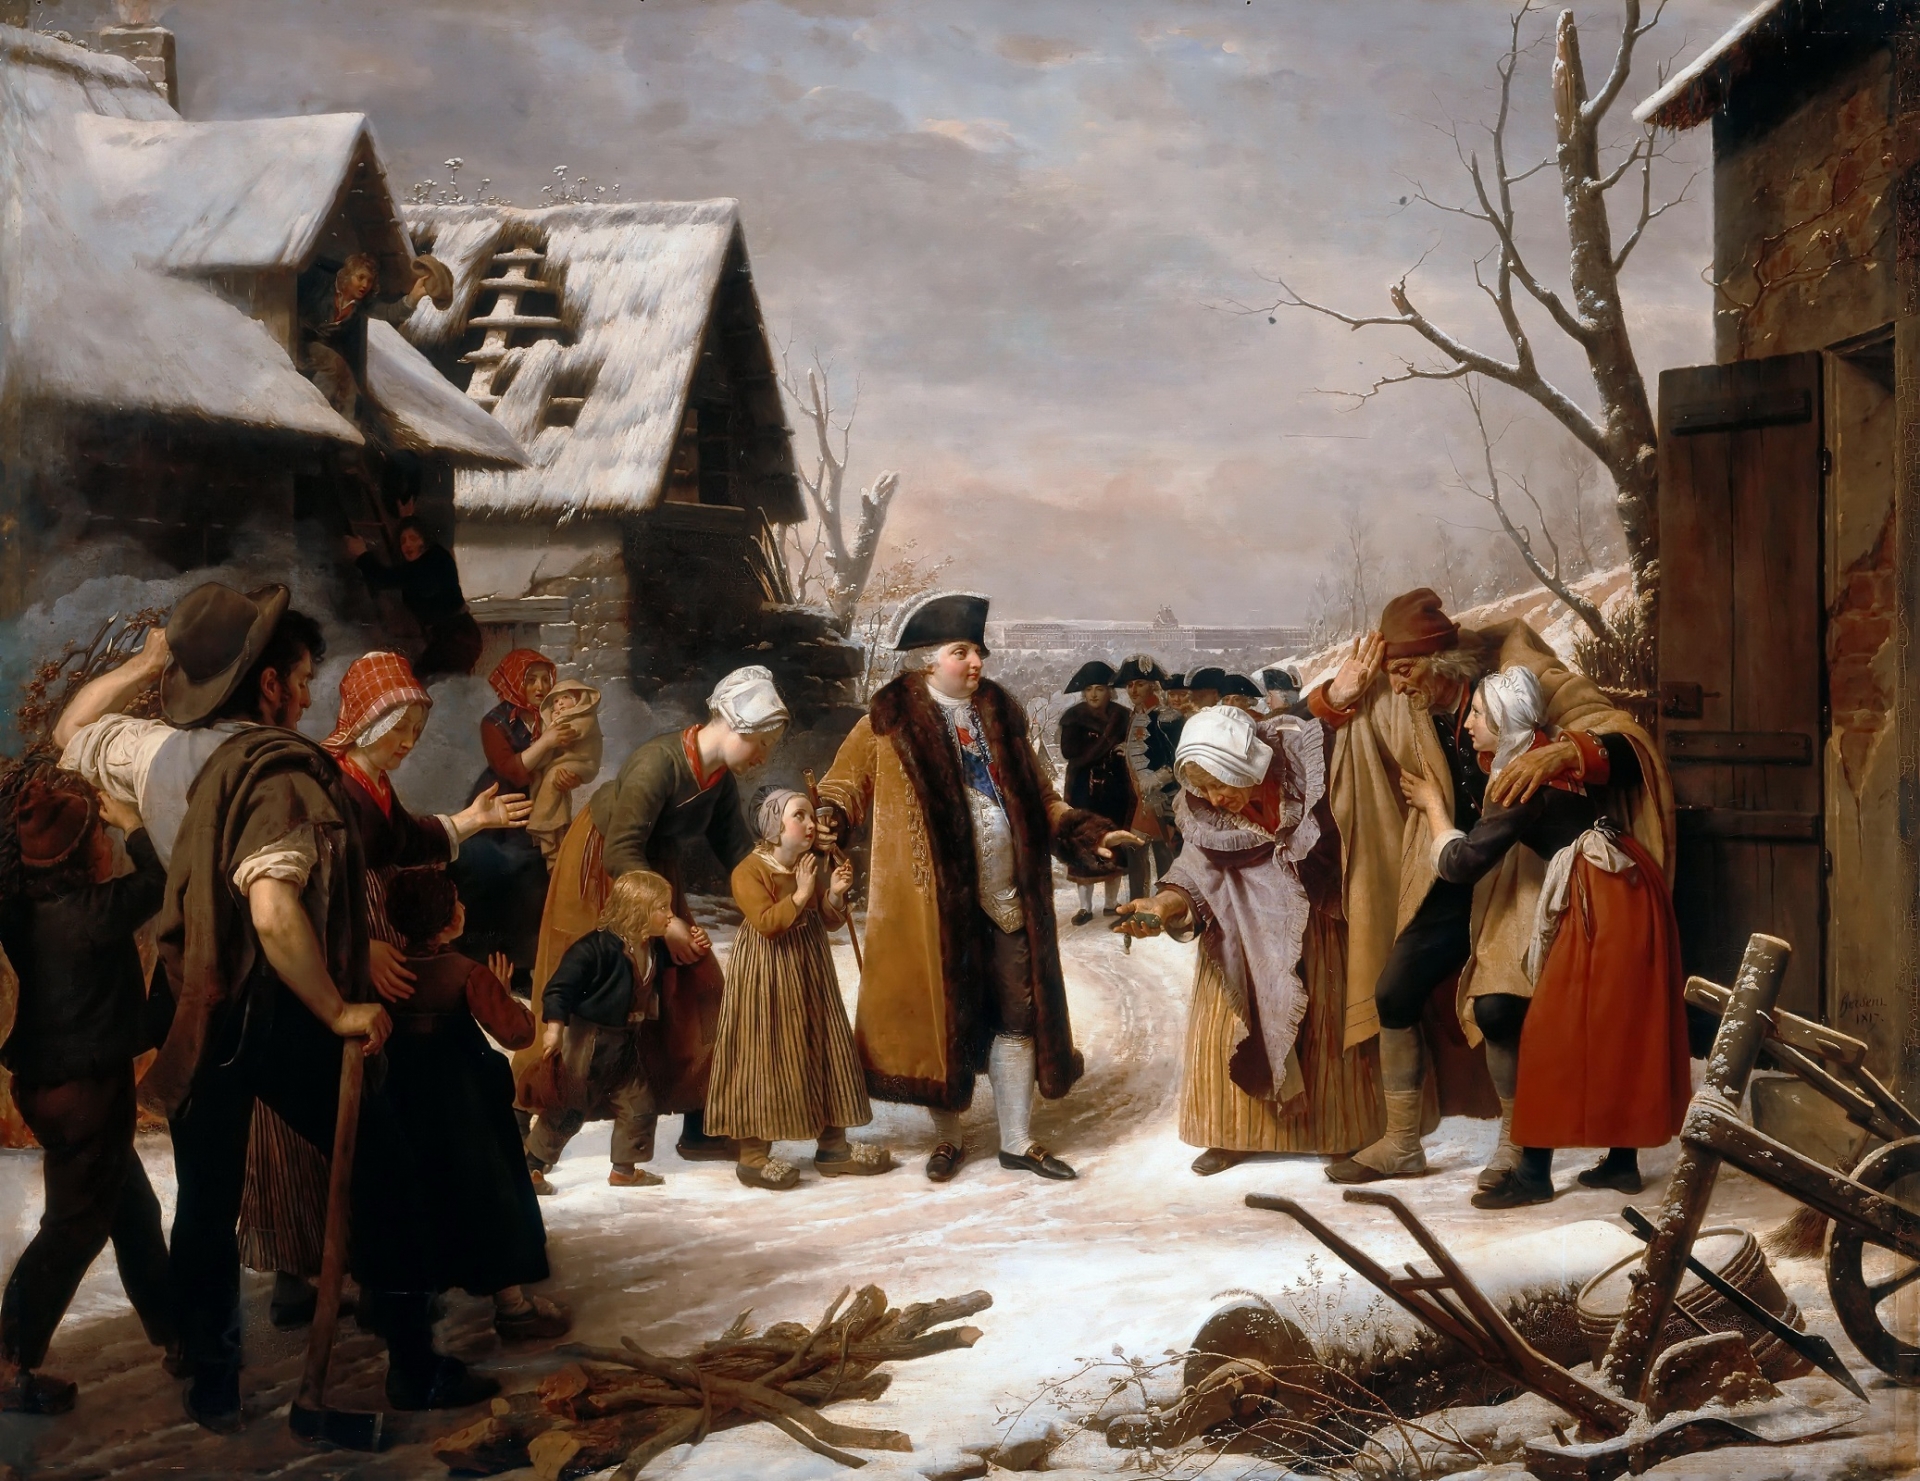 In this oil painting by Louis Hersent, Louis XVI is portrayed distributing alms to the poor.